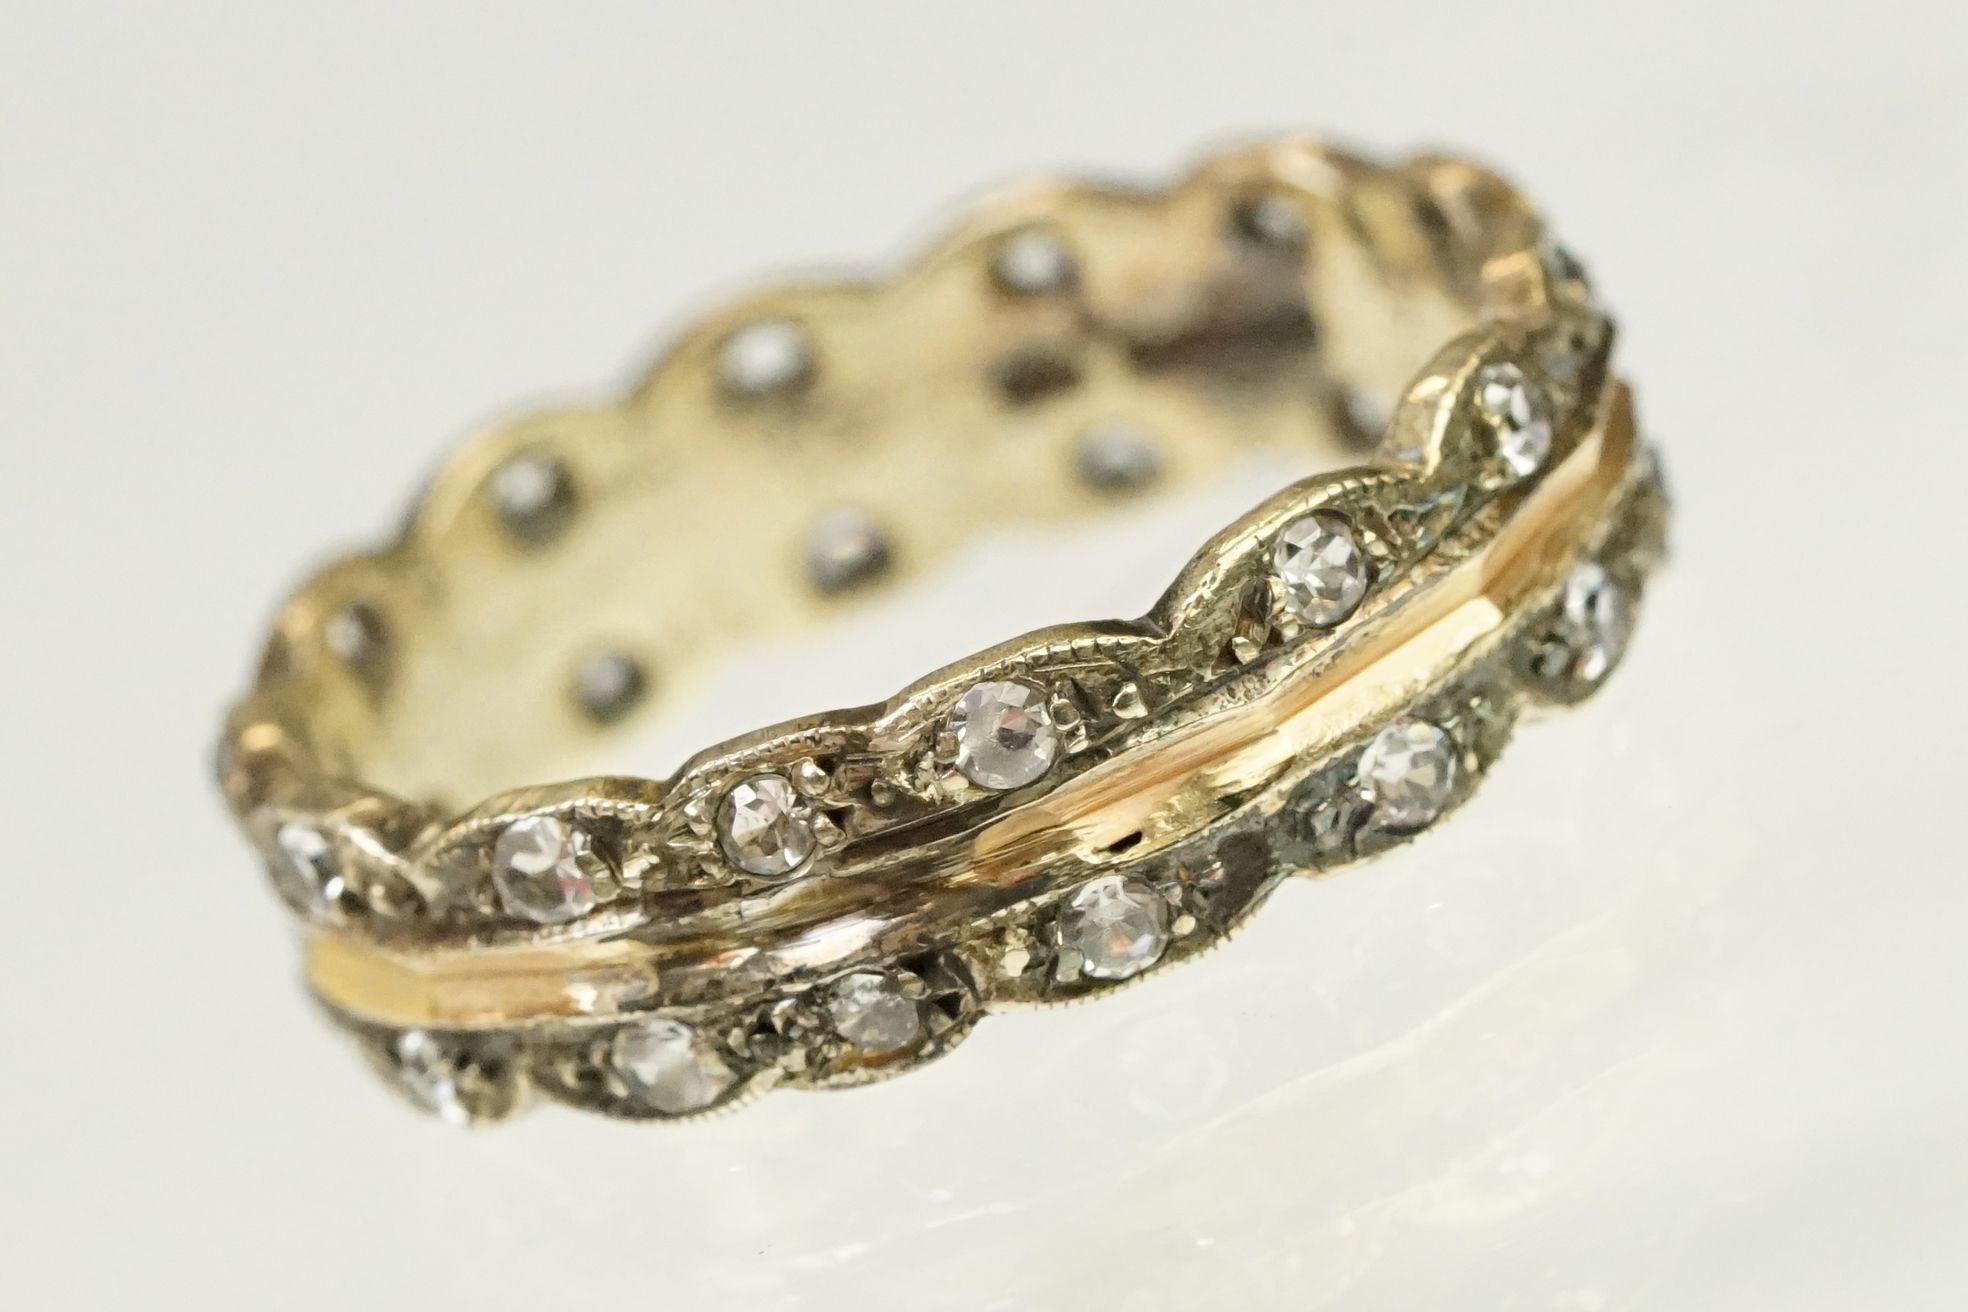 9ct gold hallmarked two tone eternity ring. The ring having a faceted rose gold centre with